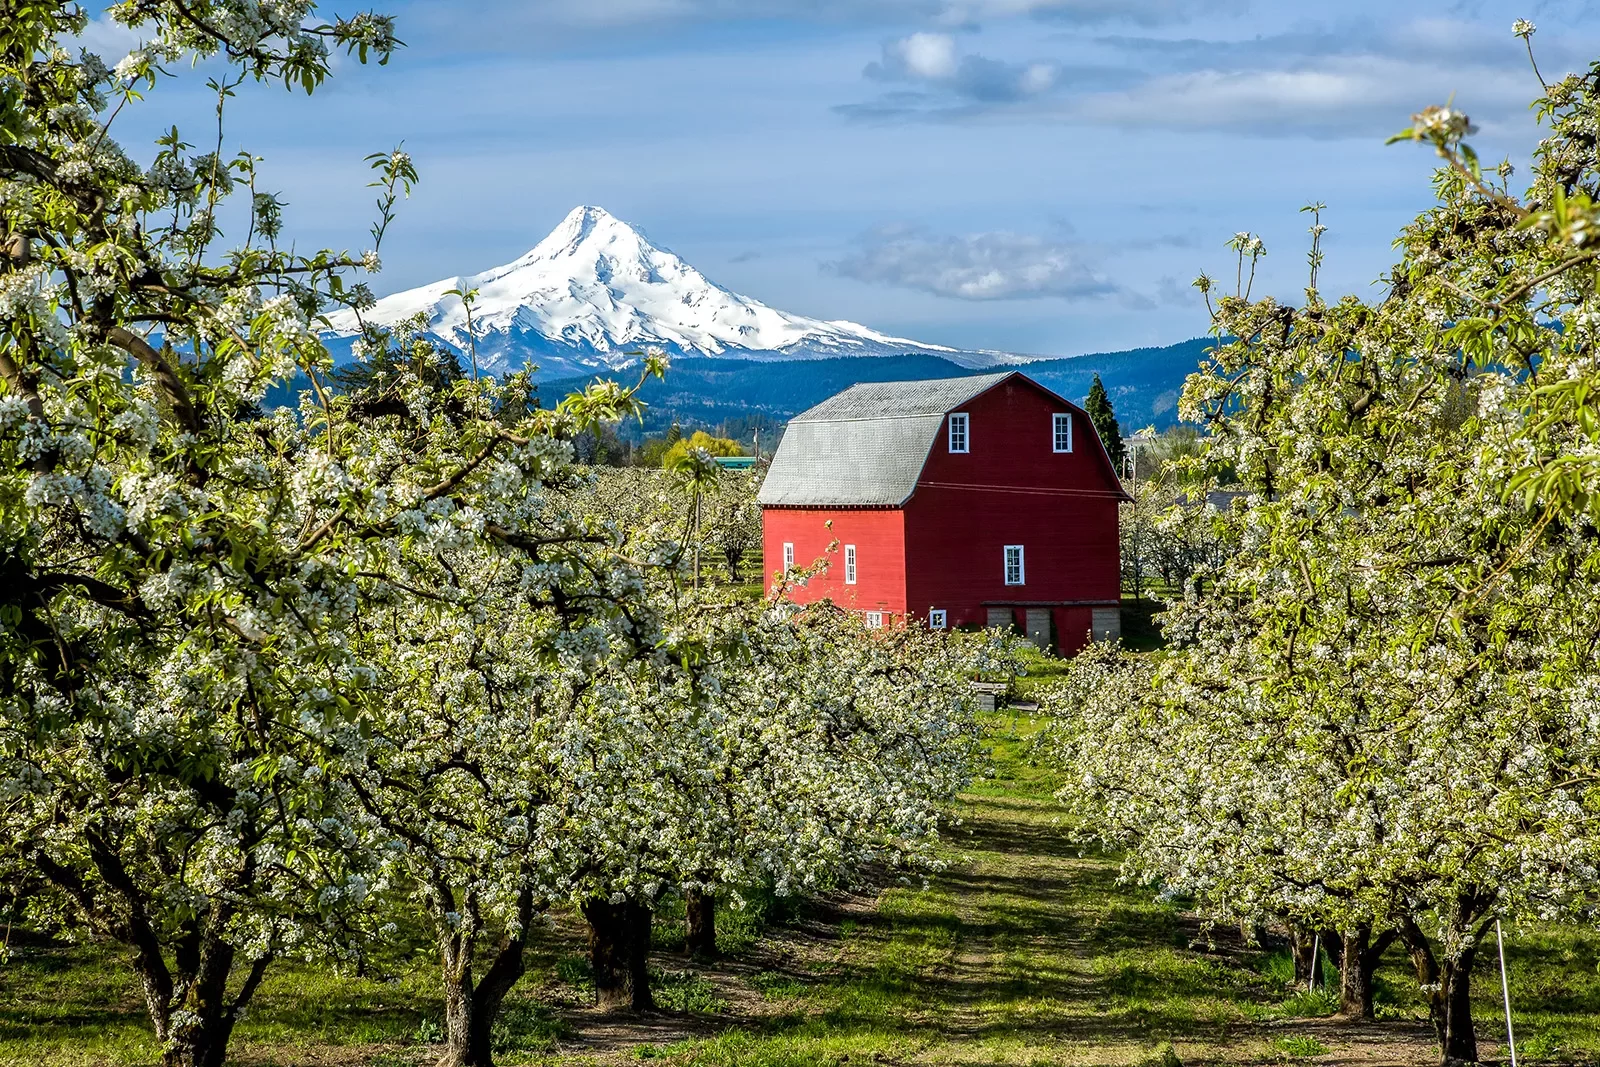 Pear orchard with red farm house, Mount Hood in background.